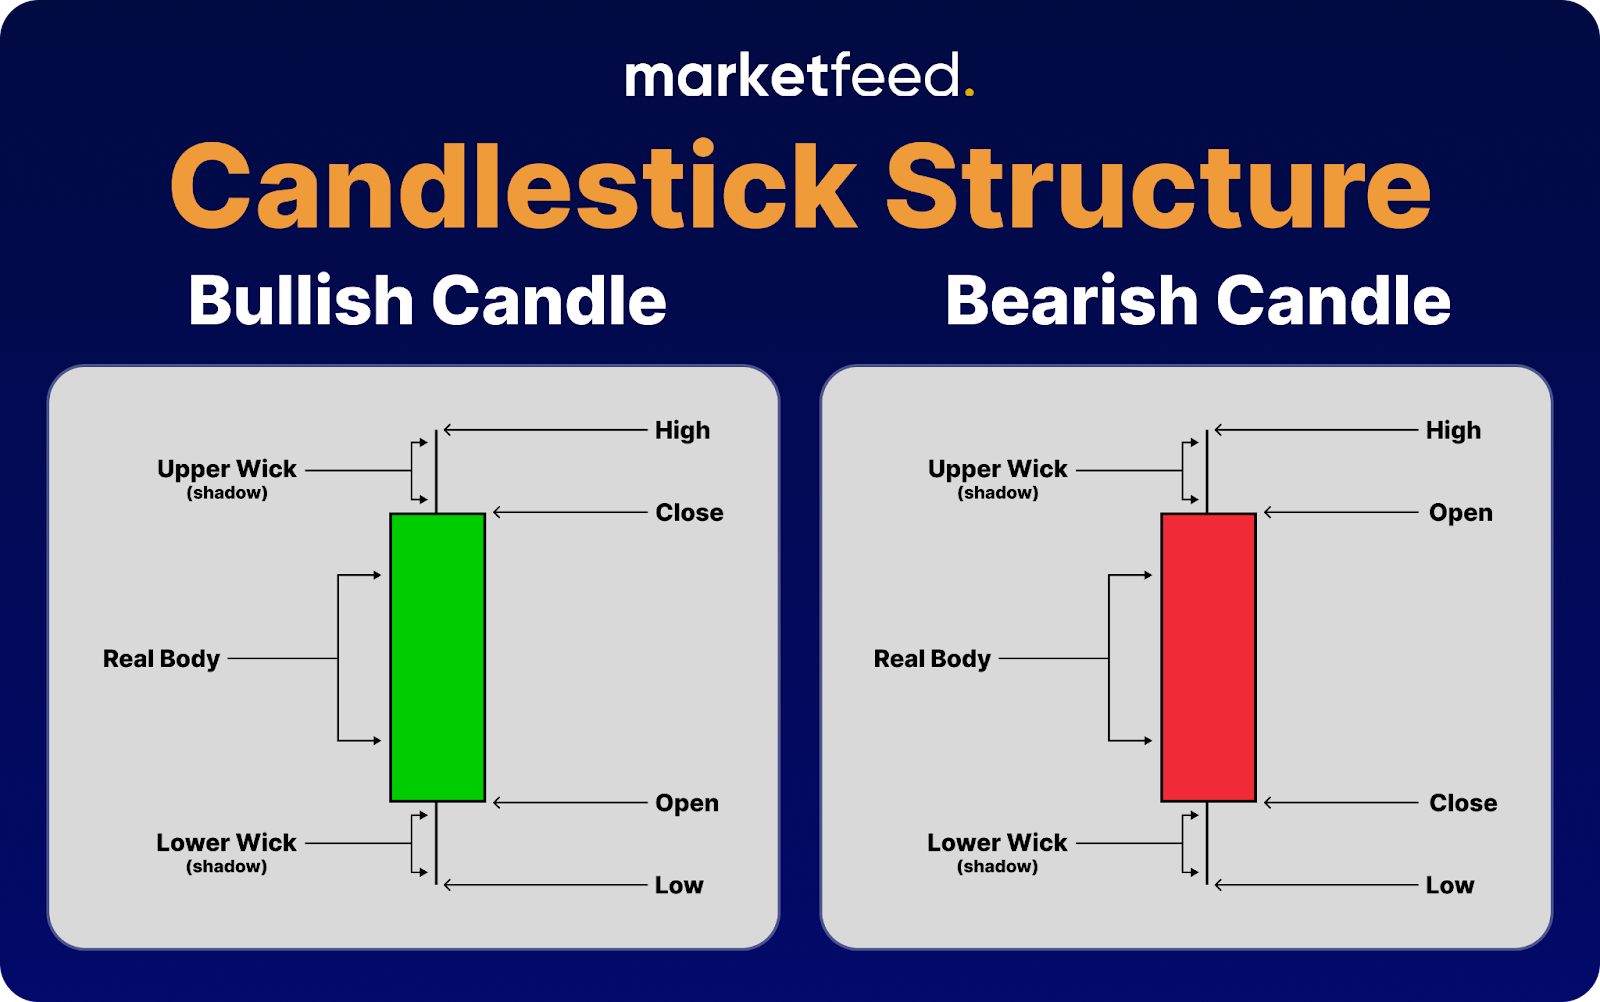 Candlestick Structure | marketfeed